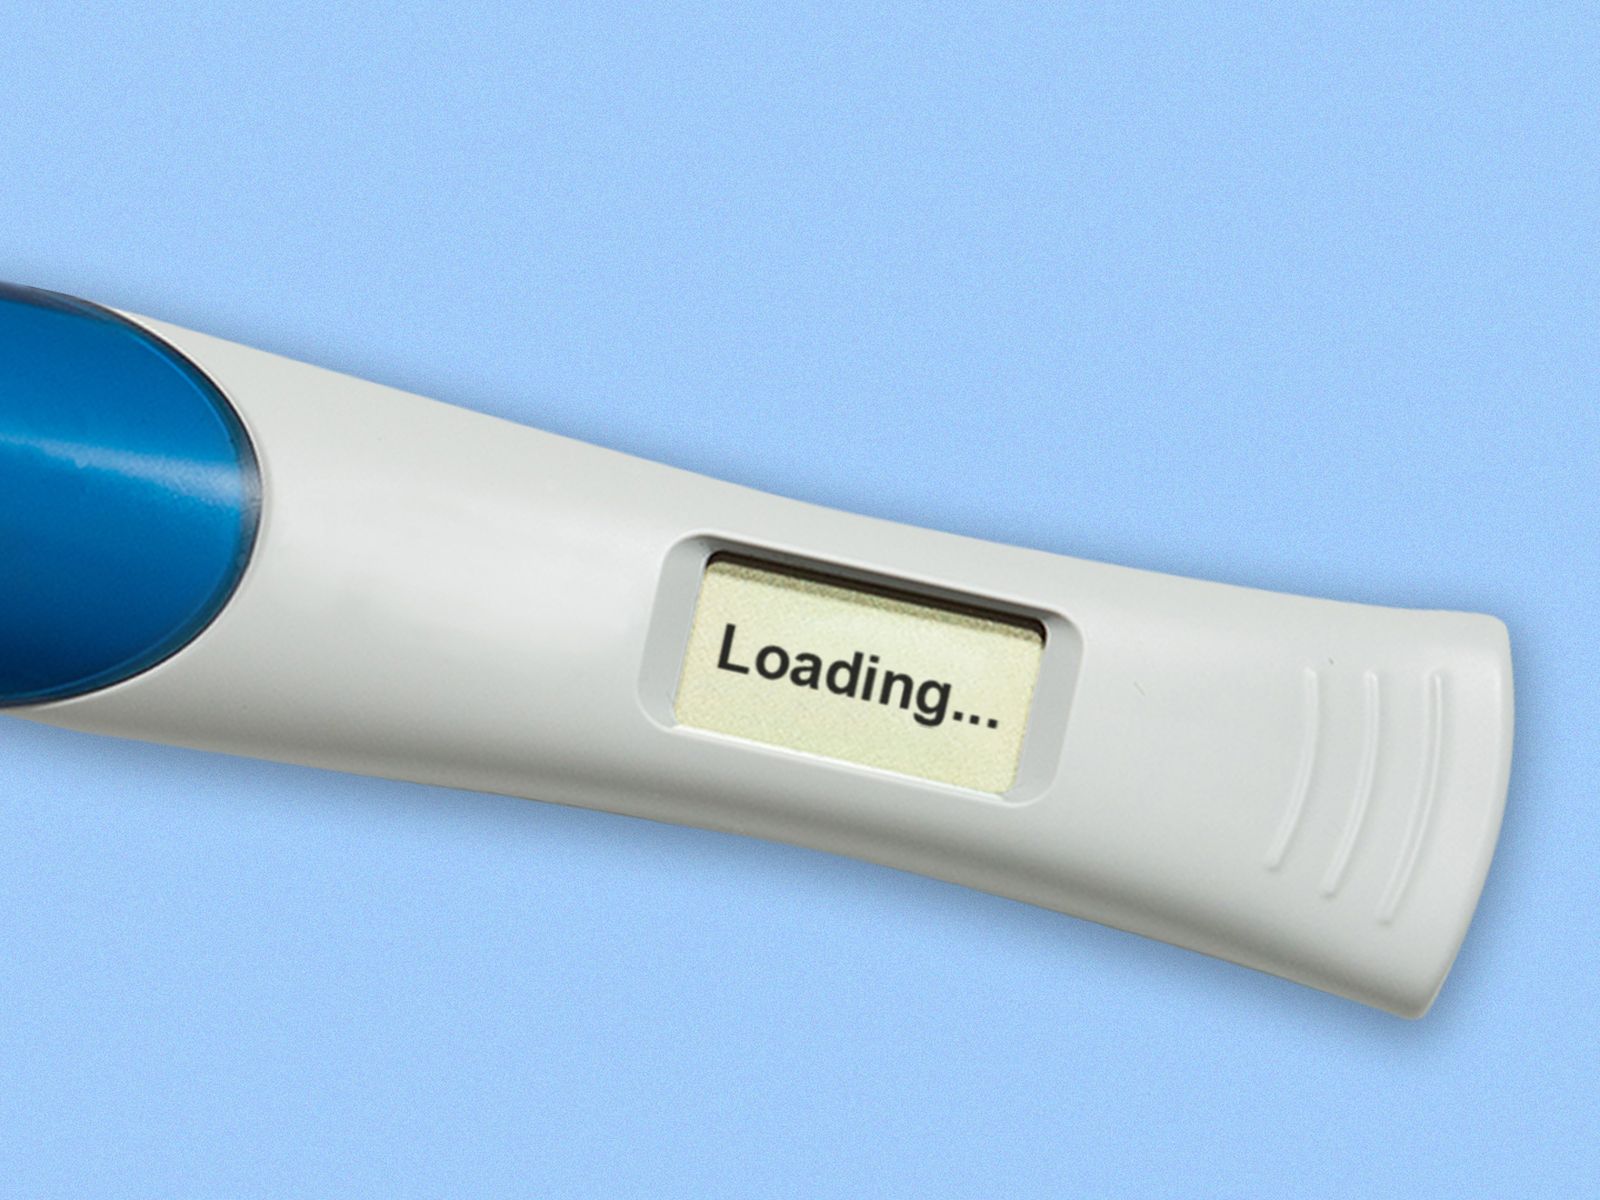 Online posts promote bogus 'home pregnancy test using urine and